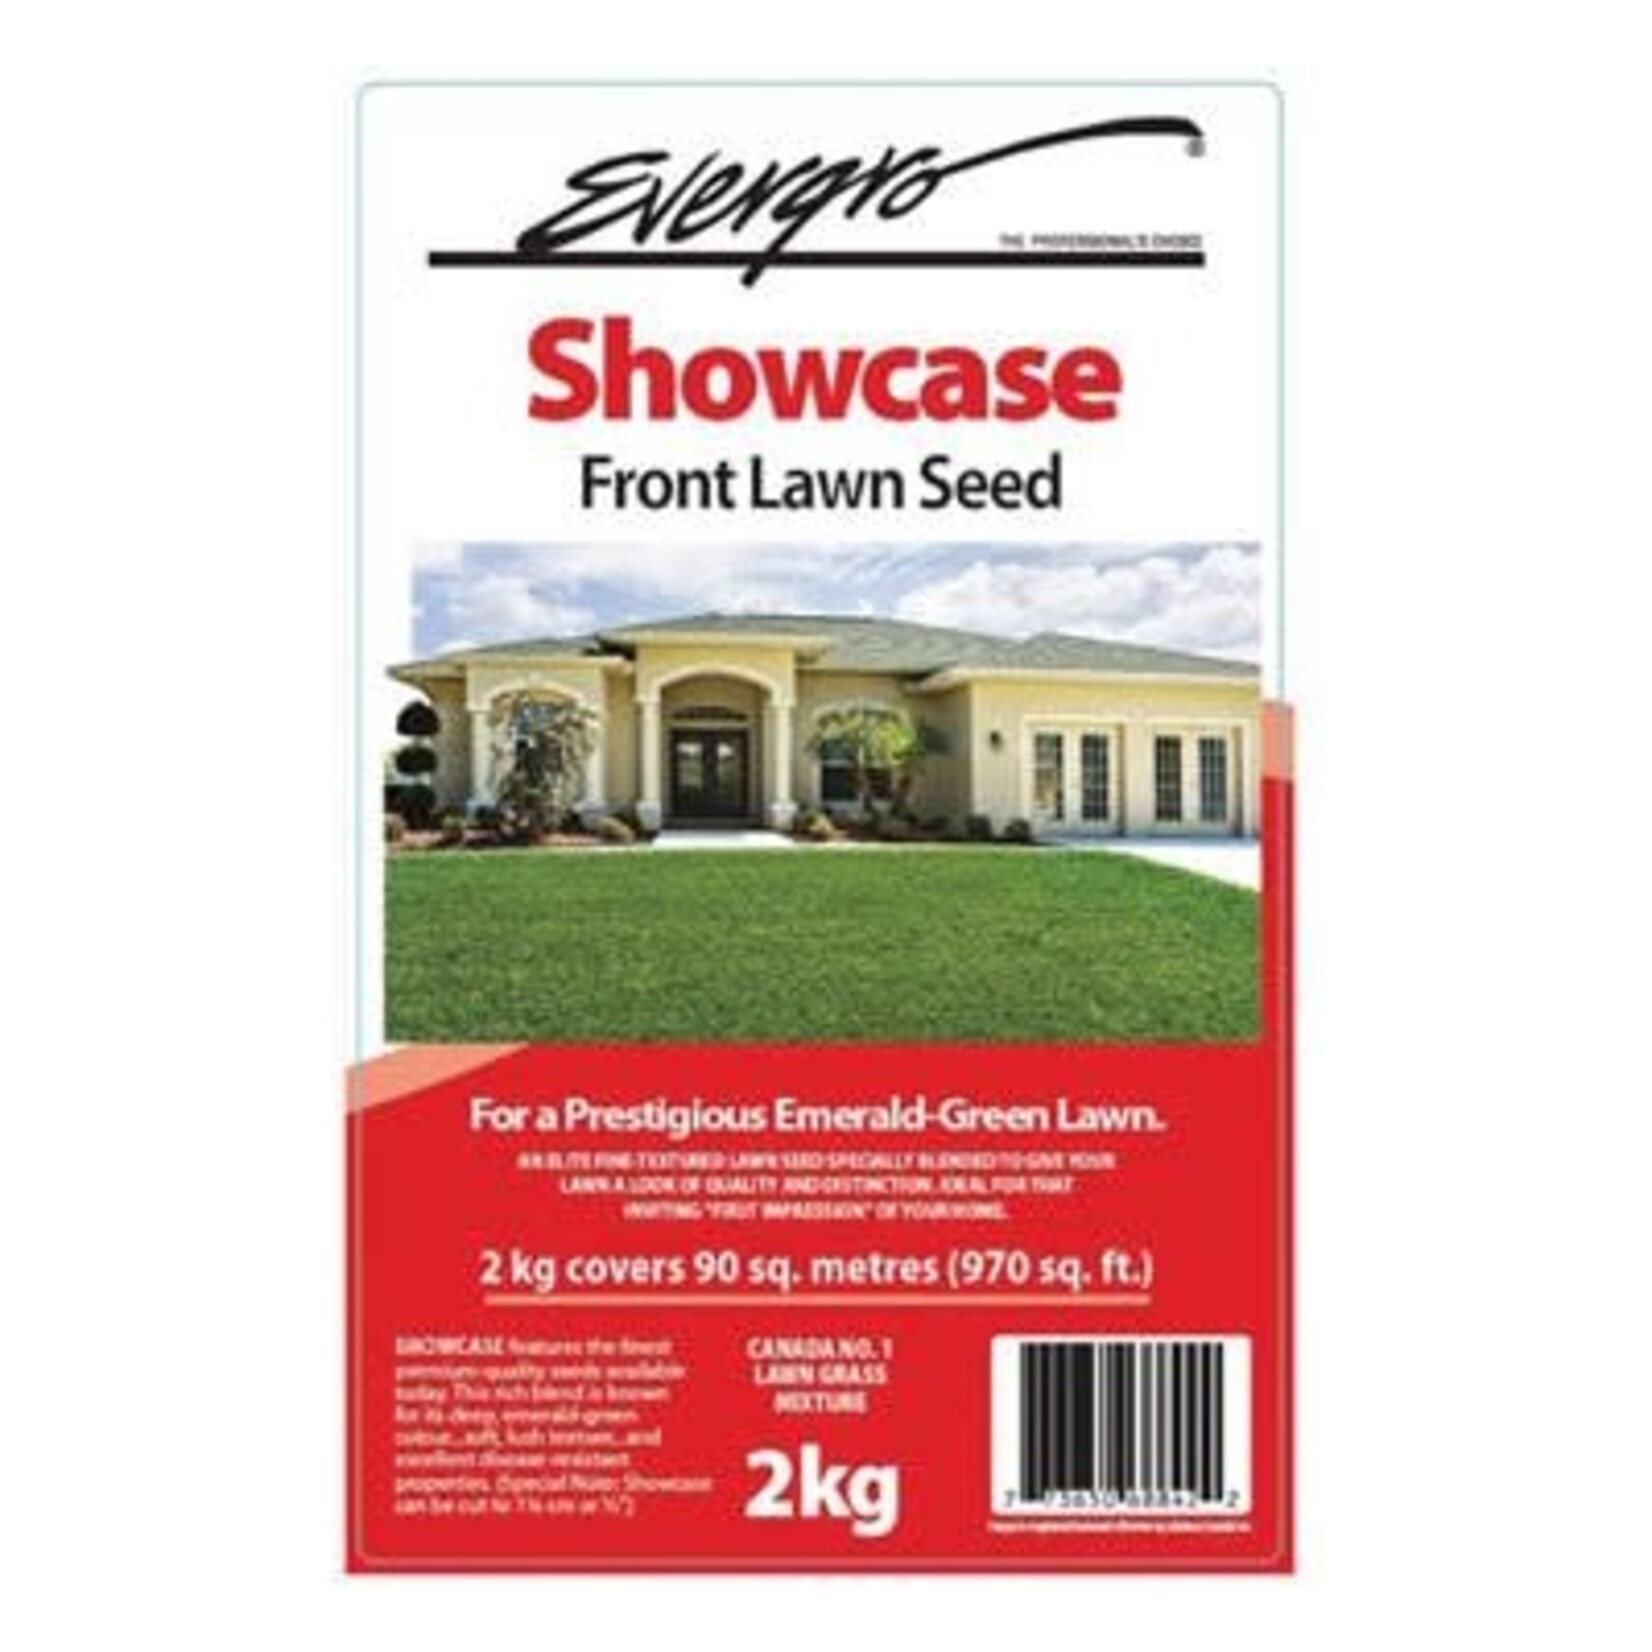 Evergro Evergro Showcase Front Lawn Grass Seed 2kg